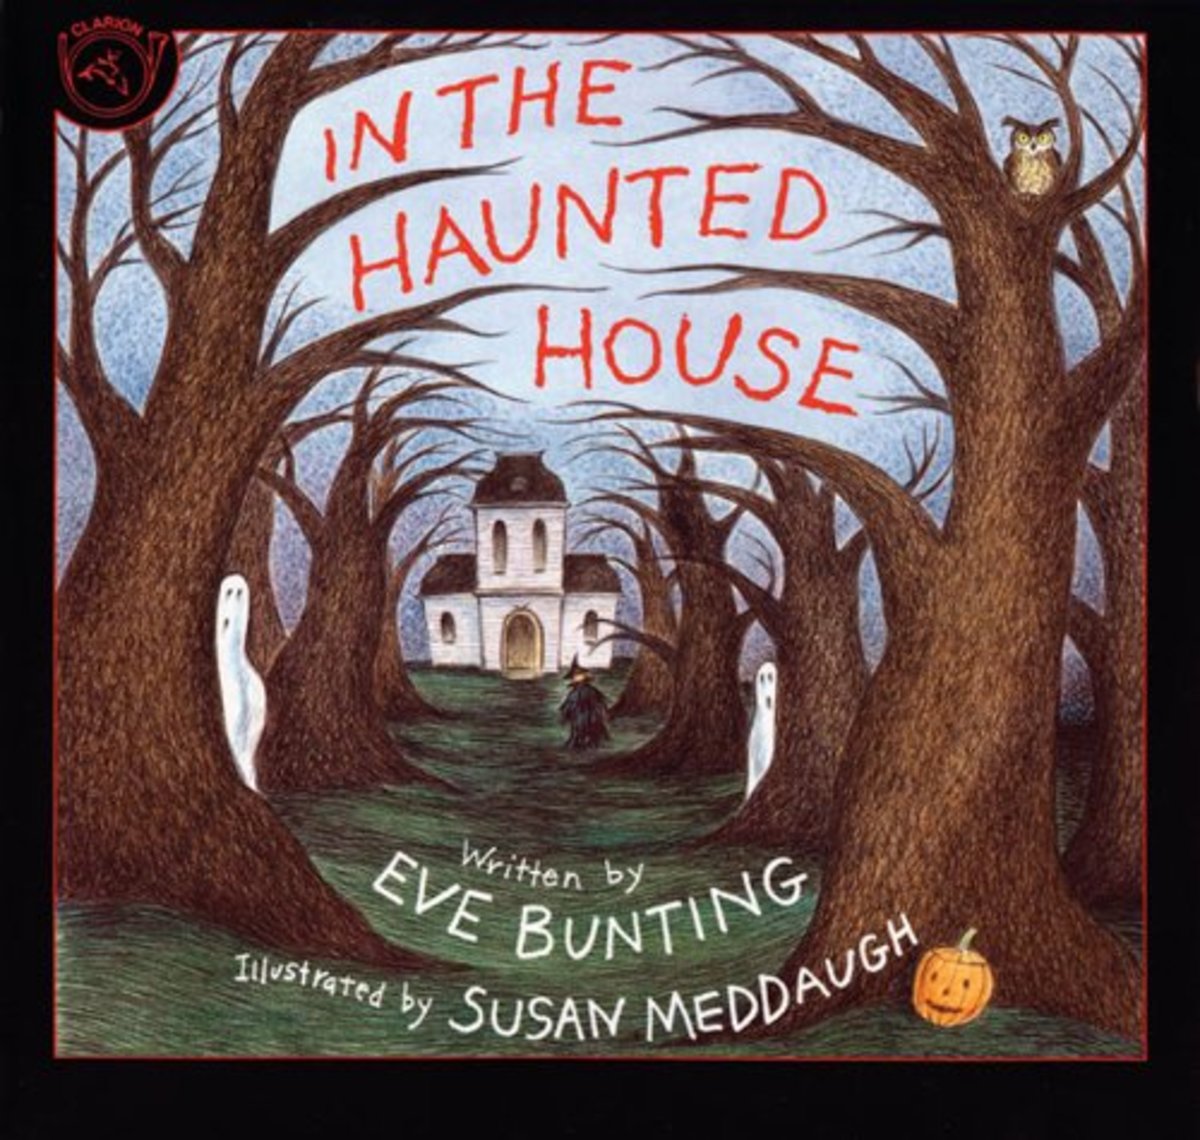 Eve Bunting's In The Haunted House, a children's Halloween picture book.